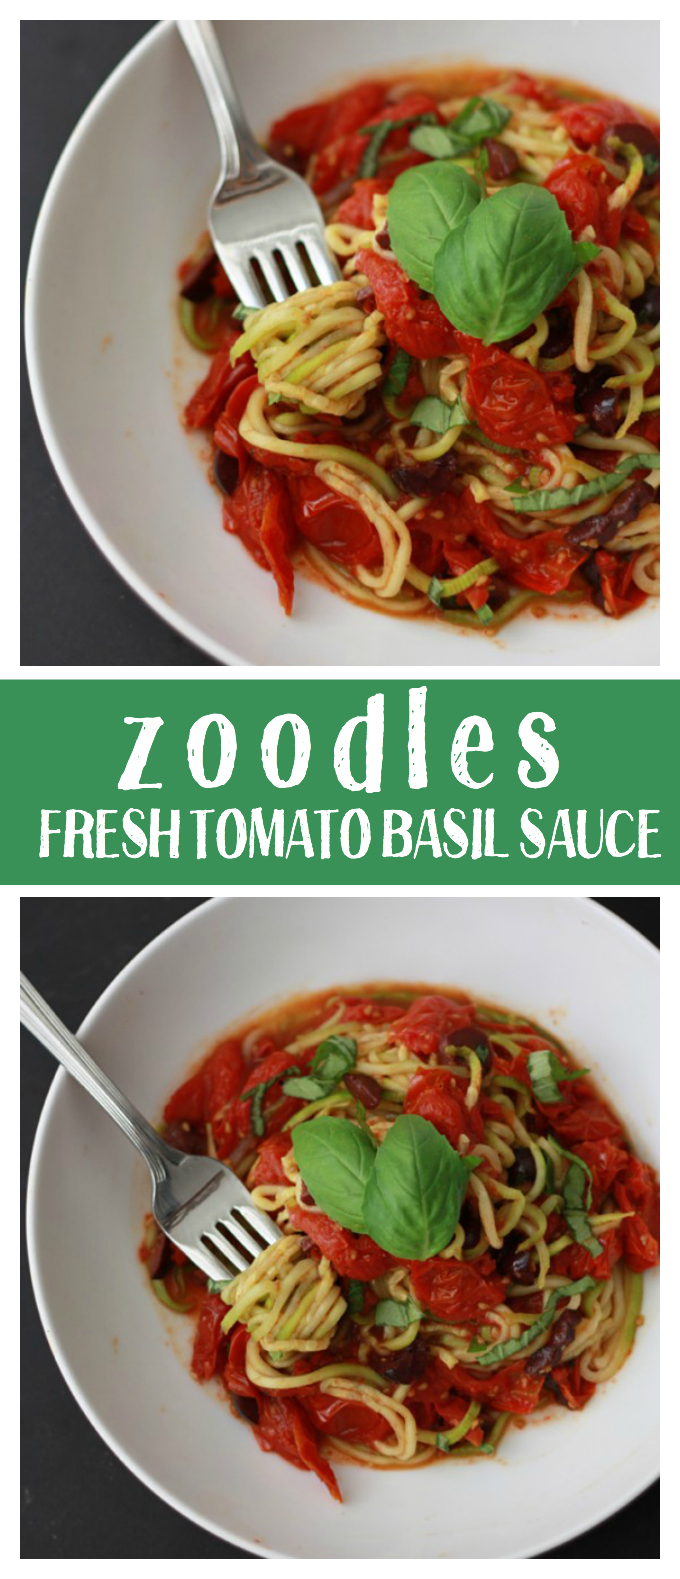 Zucchini Noodles (or Zoodles) are one of our favorite ways to fit in more veggies. This fresh tomato basil olive sauce sends them over the top! (Gluten free, vegan, and paleo!) 